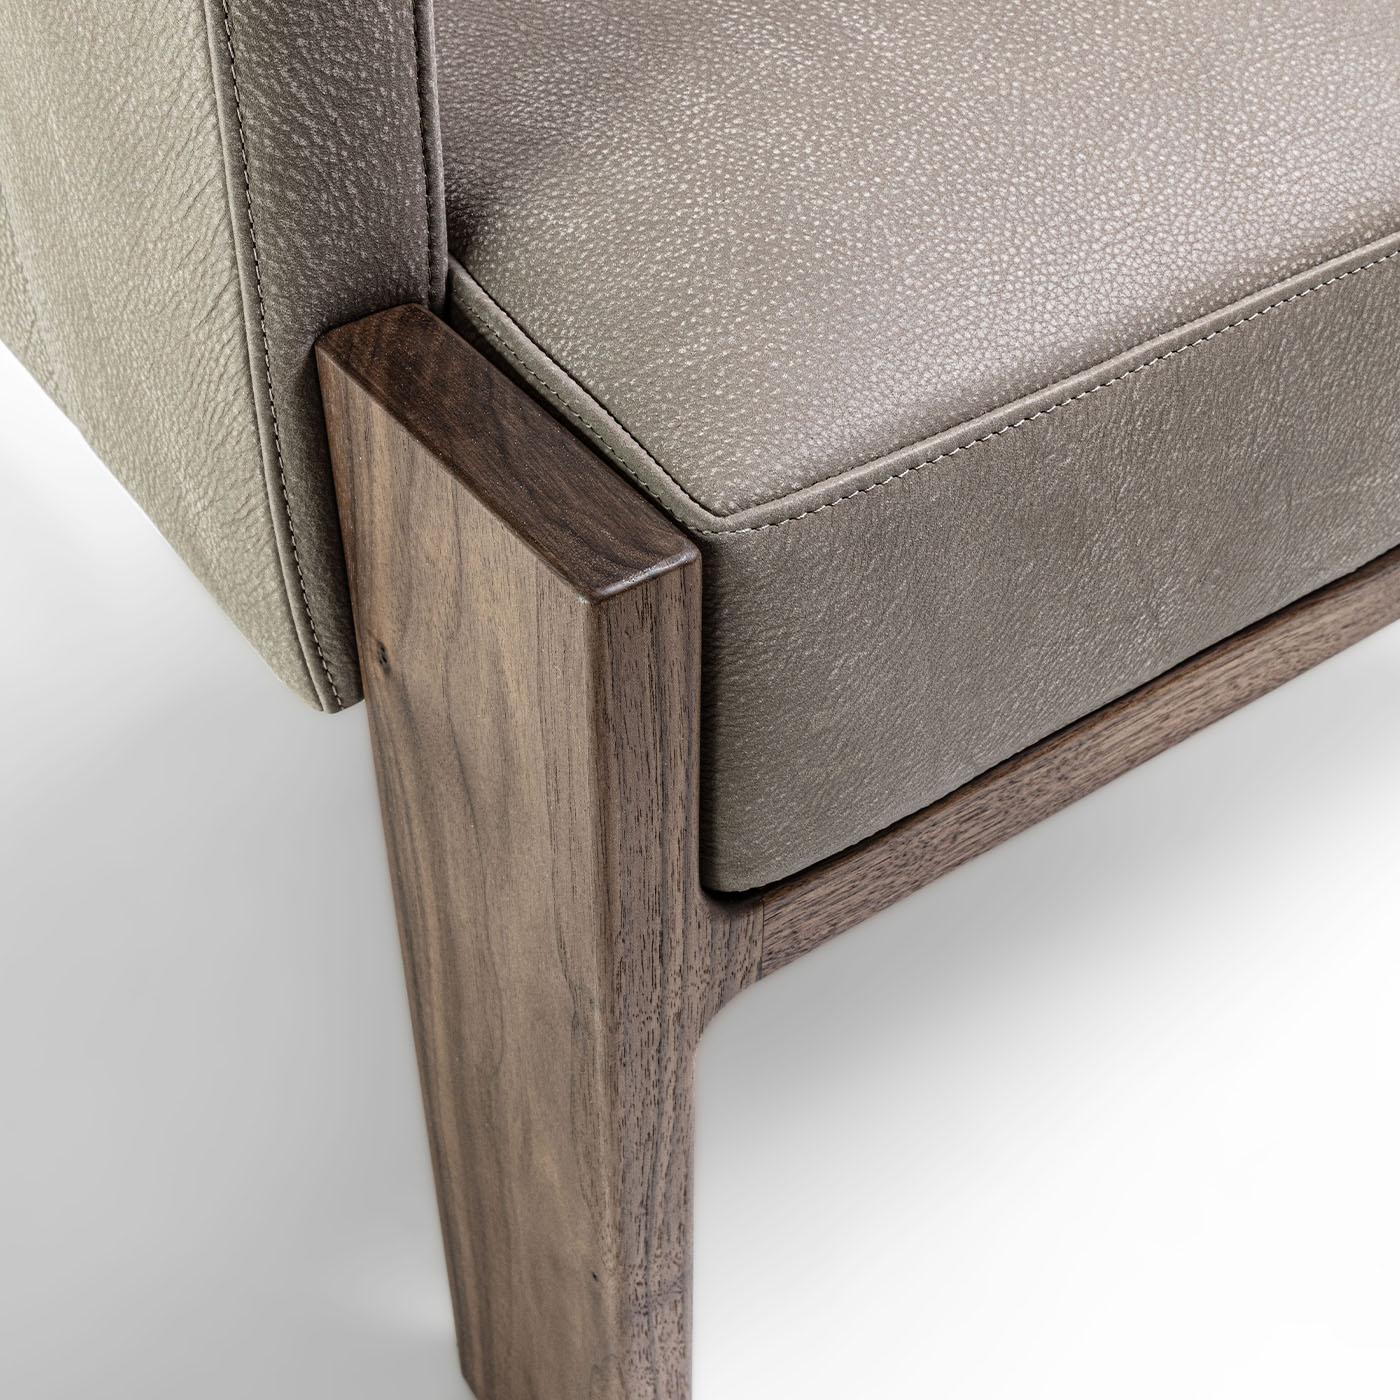 Defined by rigorous profiles, a solid Canaletto walnut structure lends this armchair its distinctive sculptural allure. Utmost comfort is ensured by the padded shell's enveloping design, finalized by precious taupe-hued leather that showcases an